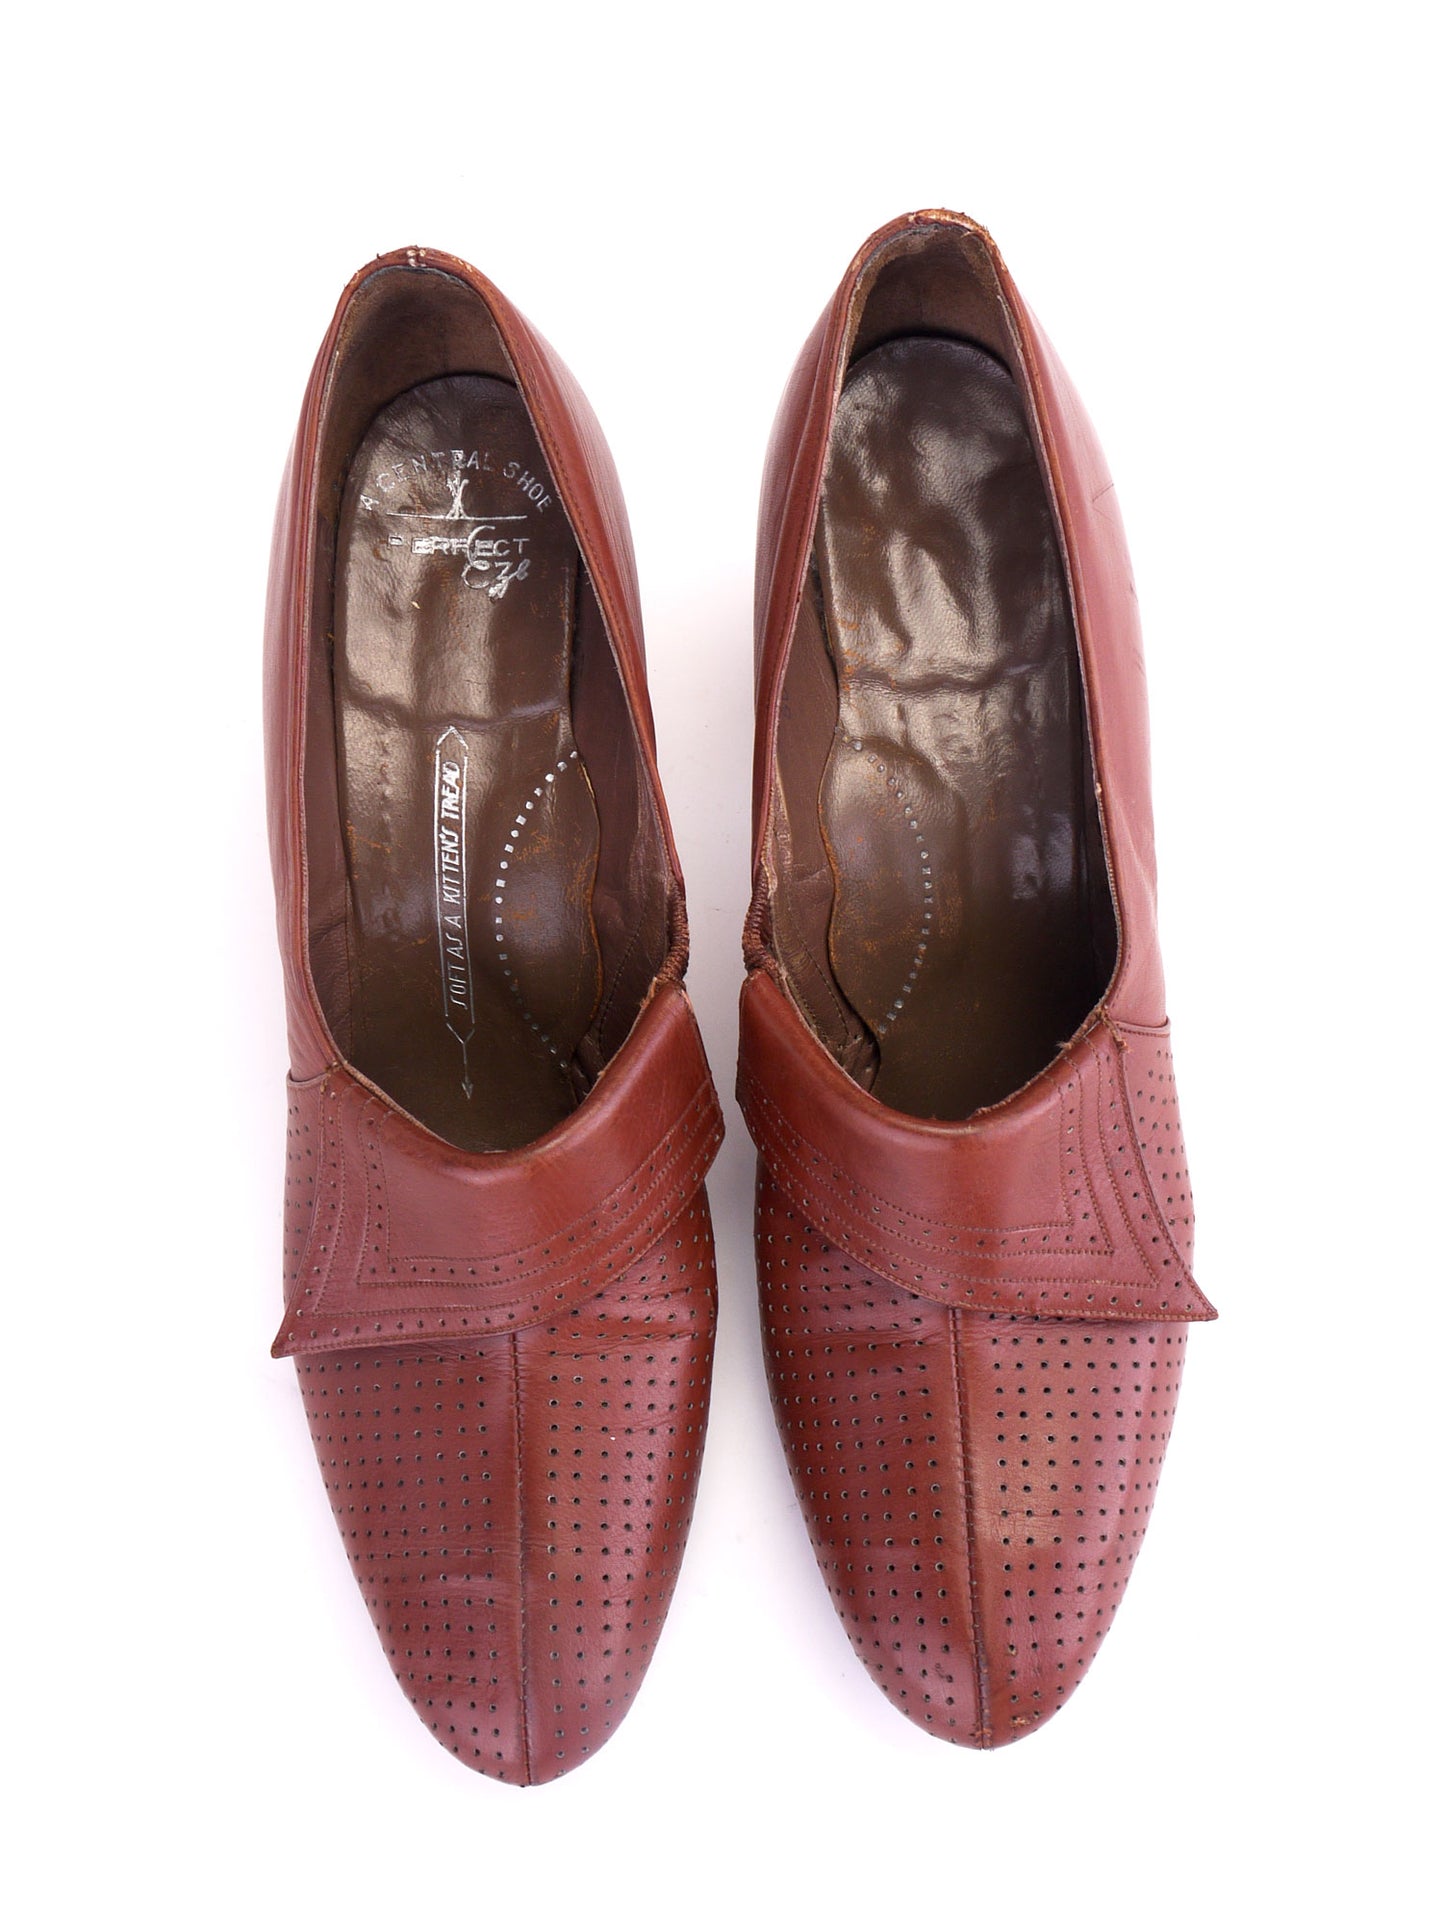 1930s 40s Perforated Tan Pumps with Tab by Central UK 5